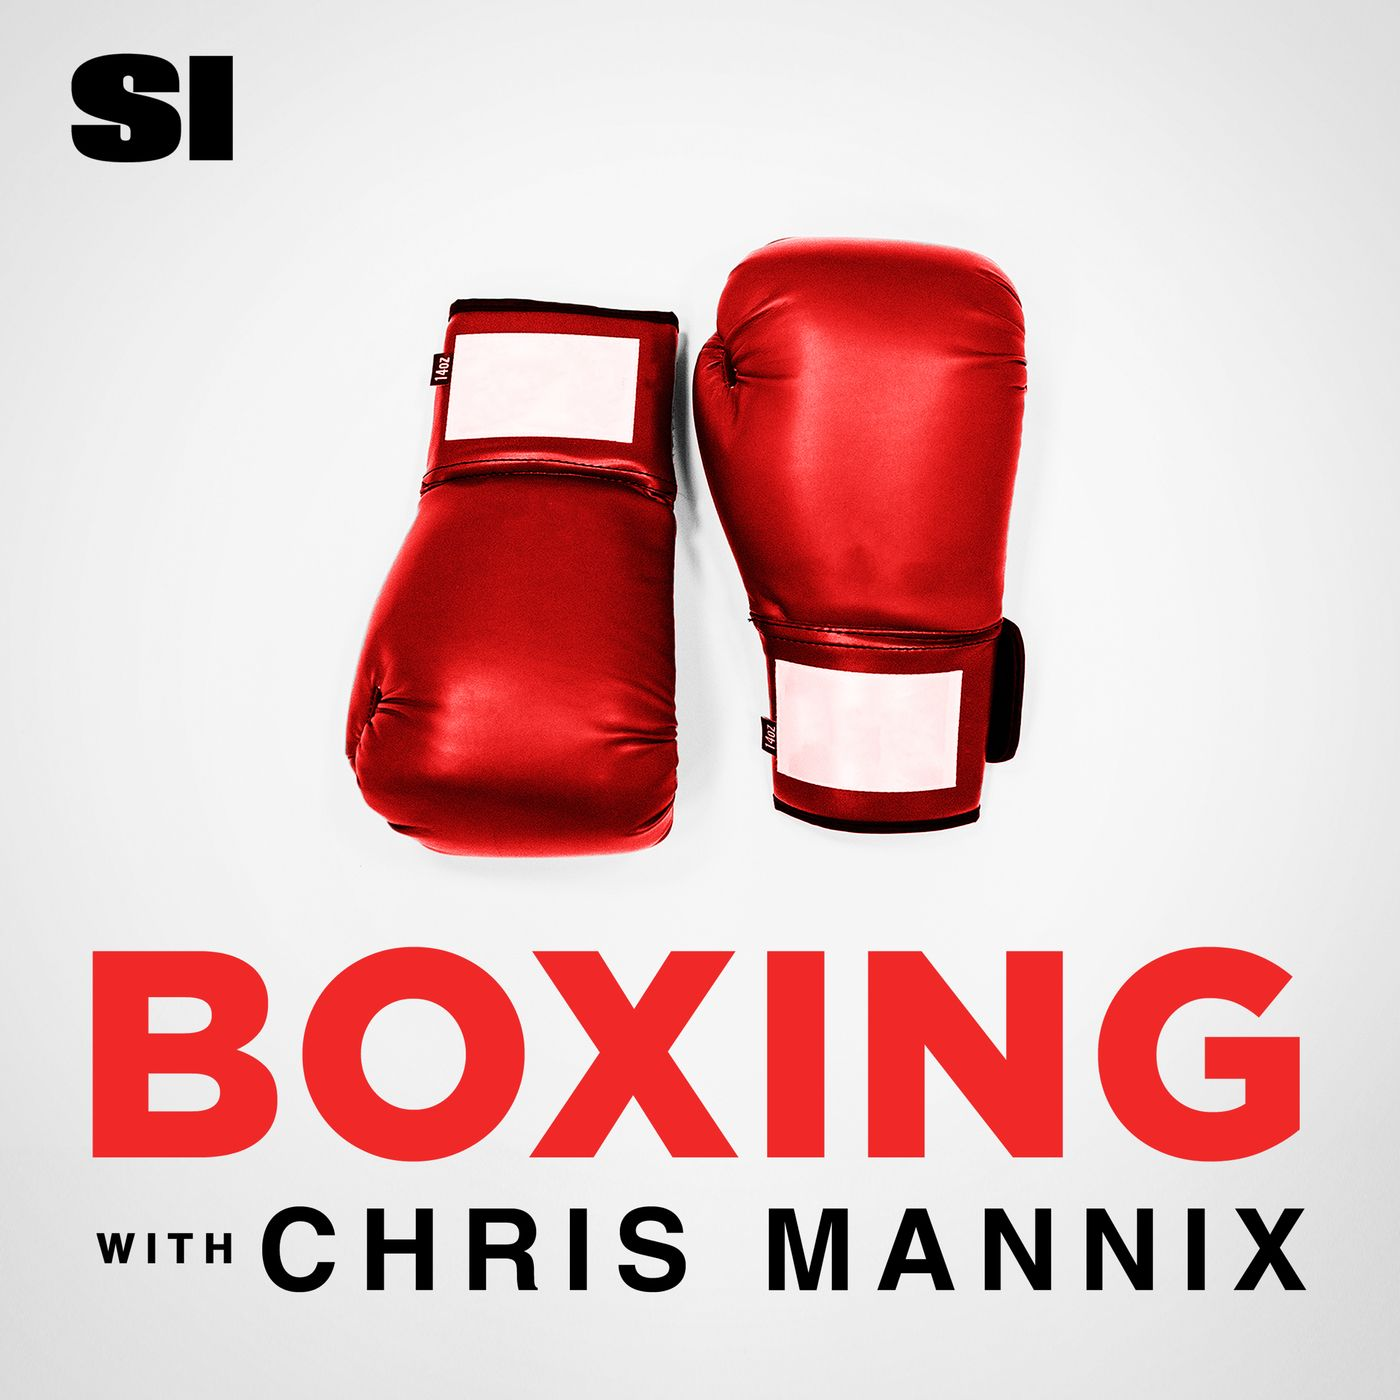 A highlight from Boxing with Chris Mannix - Canelo is back